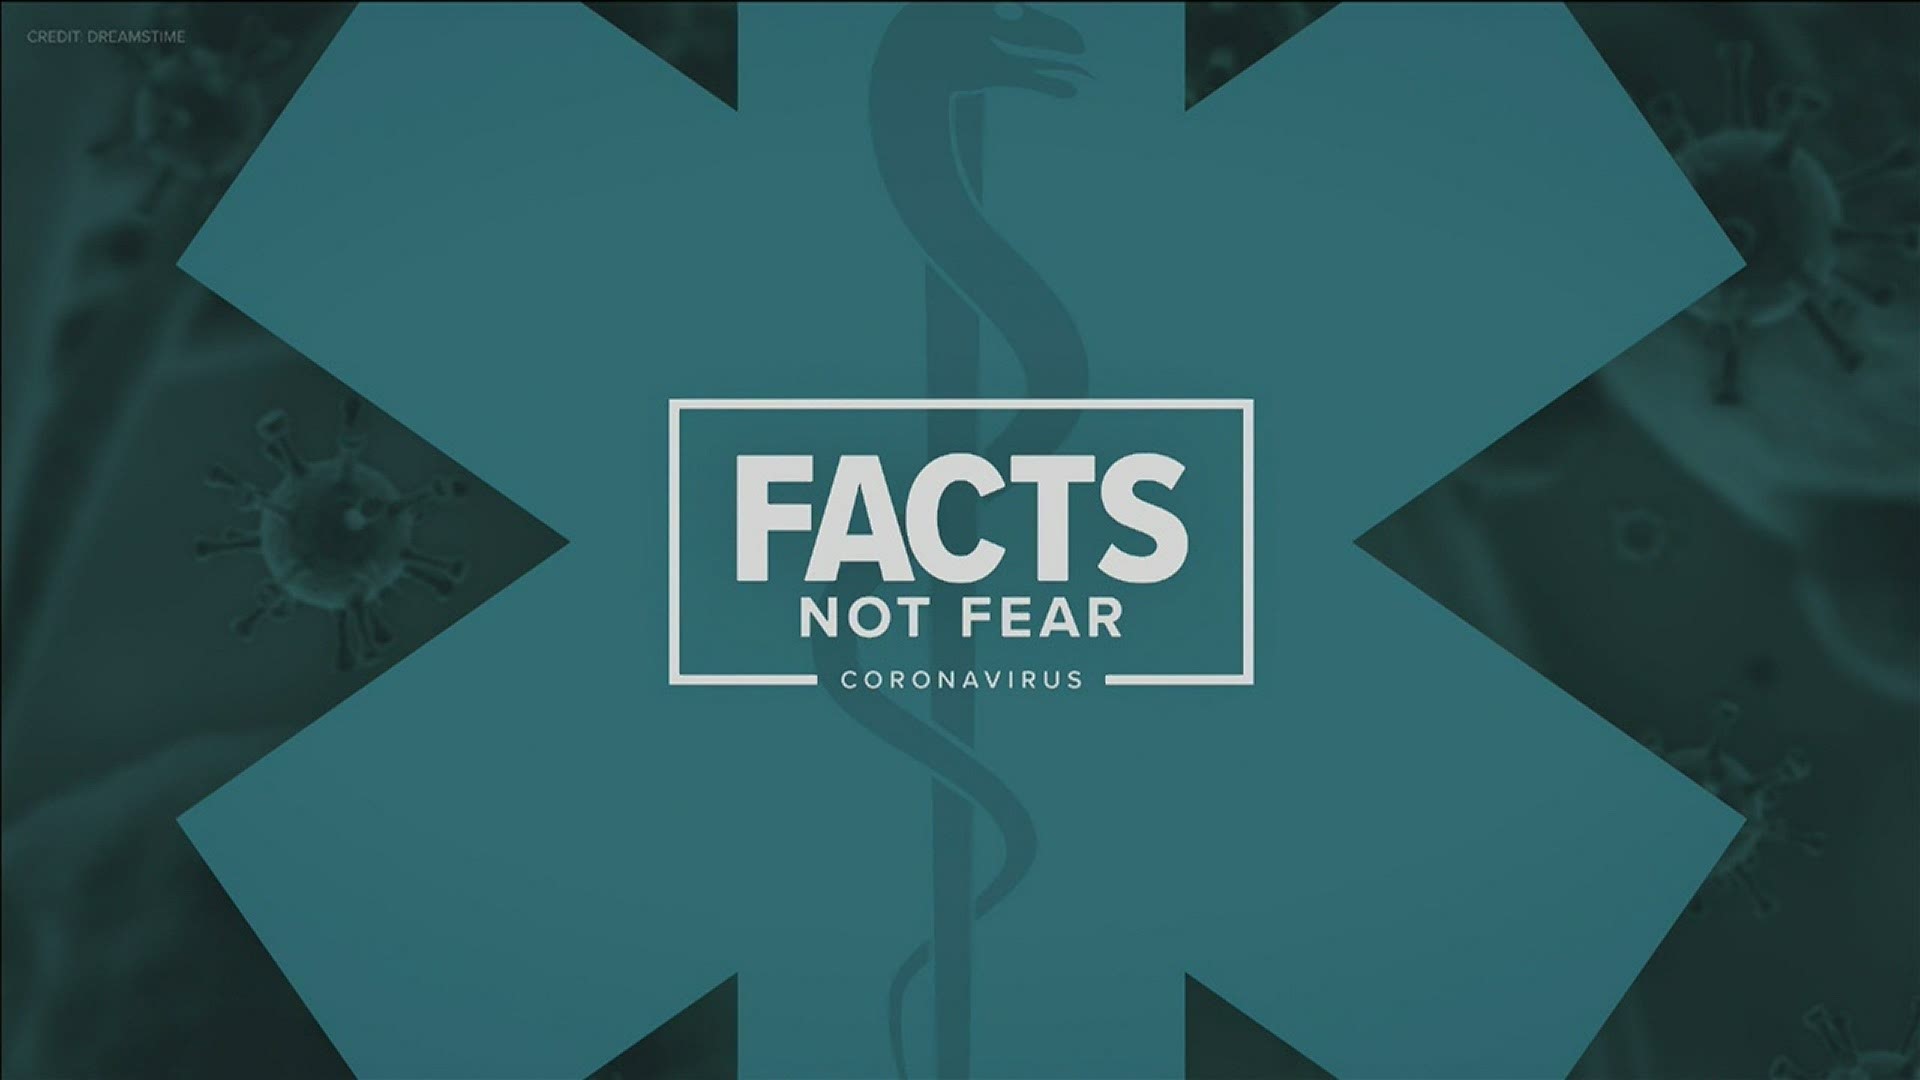 Local 24 News is committed to giving information about the coronavirus with facts, not fear